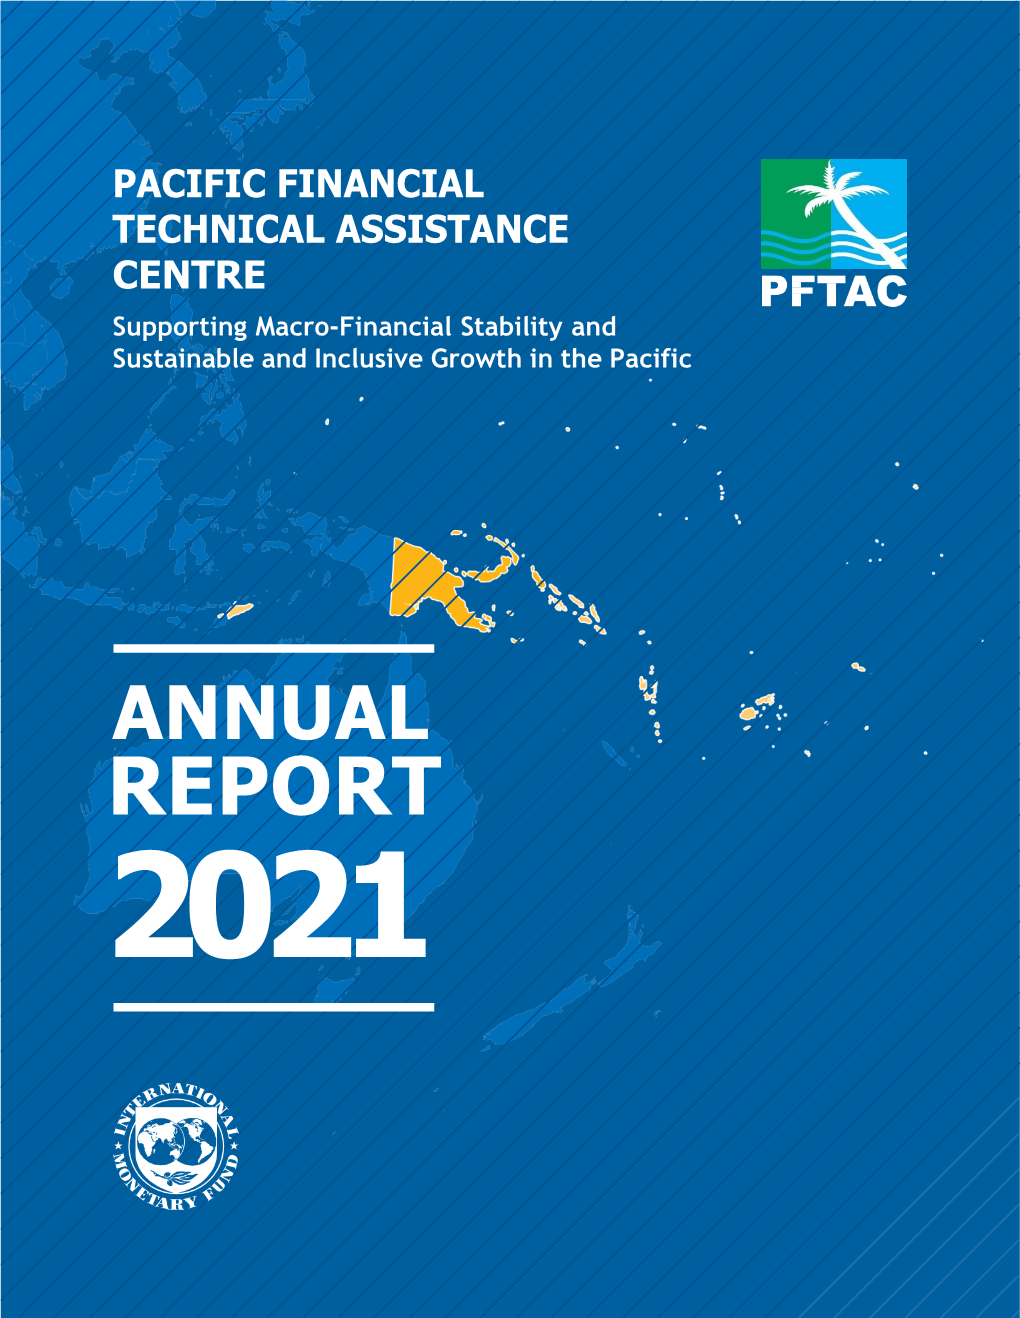 FY2021 Annual Report